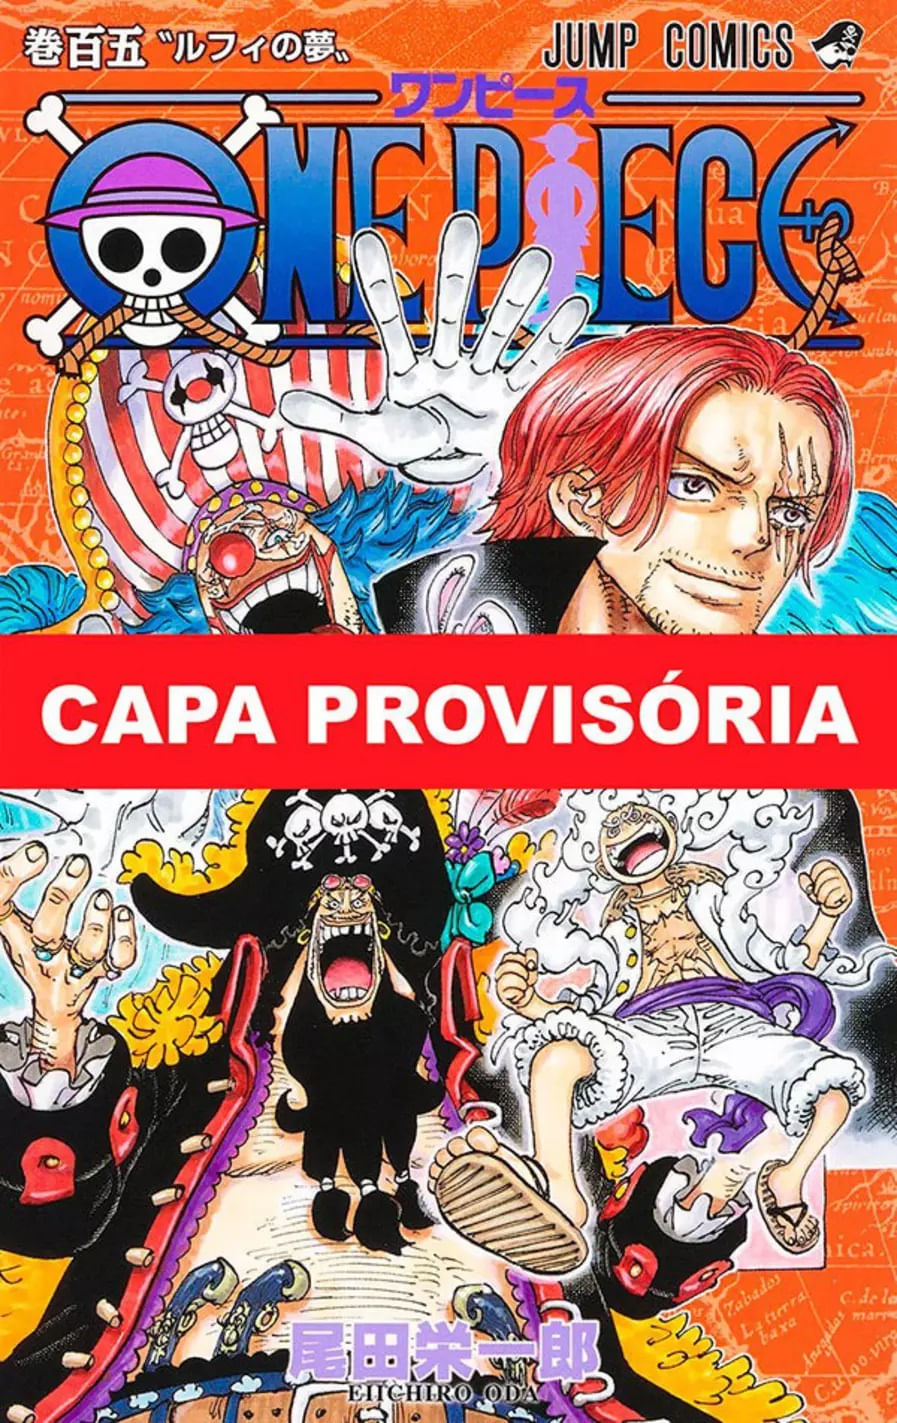 Pin by Luguel on one piece  One piece cartoon, One piece manga, One piece  drawing